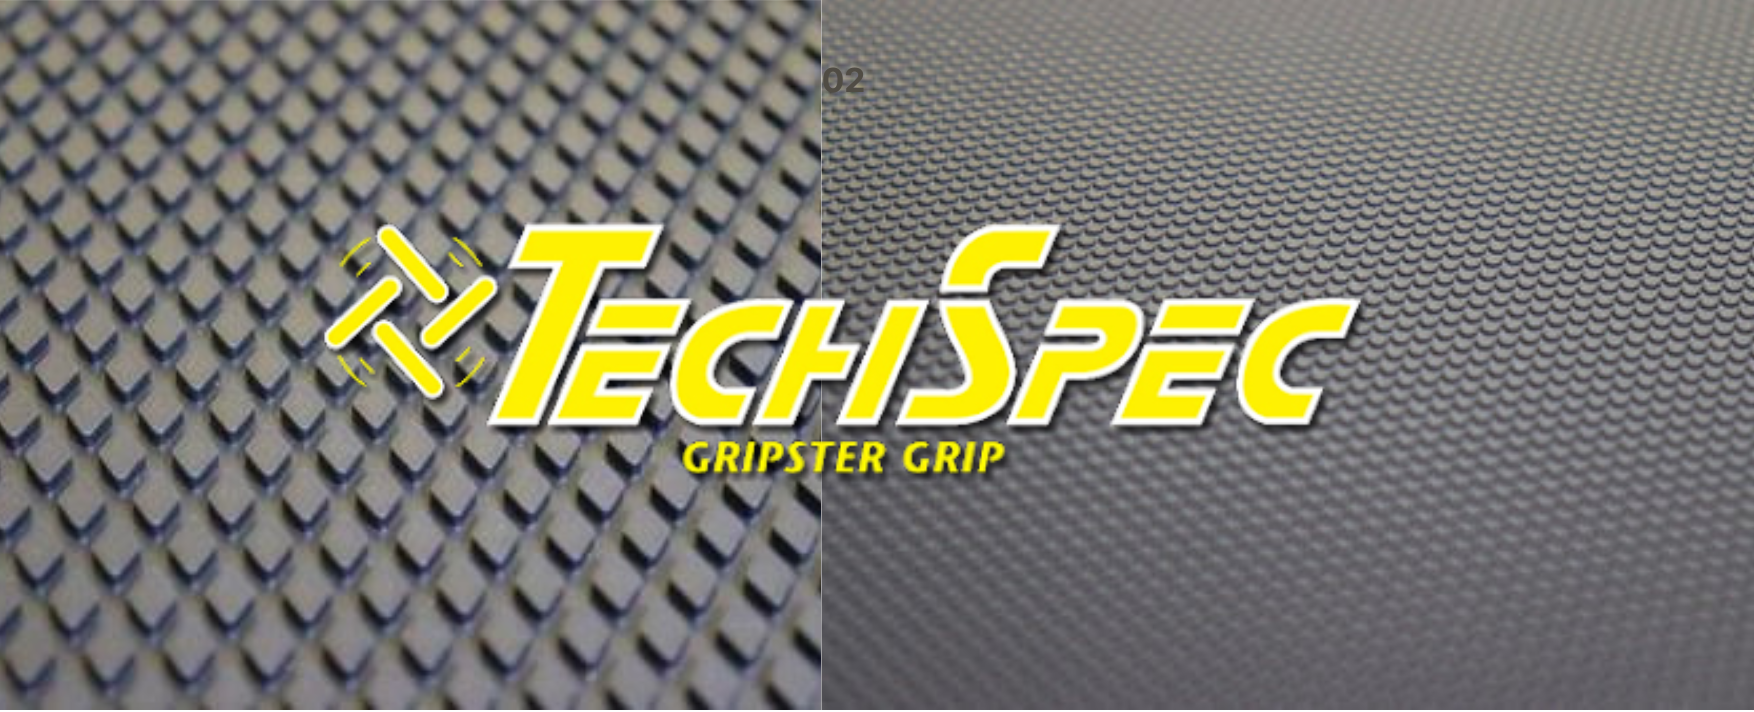 What’s the difference between the TechSpec Snake Skin and XL2 tank grips?